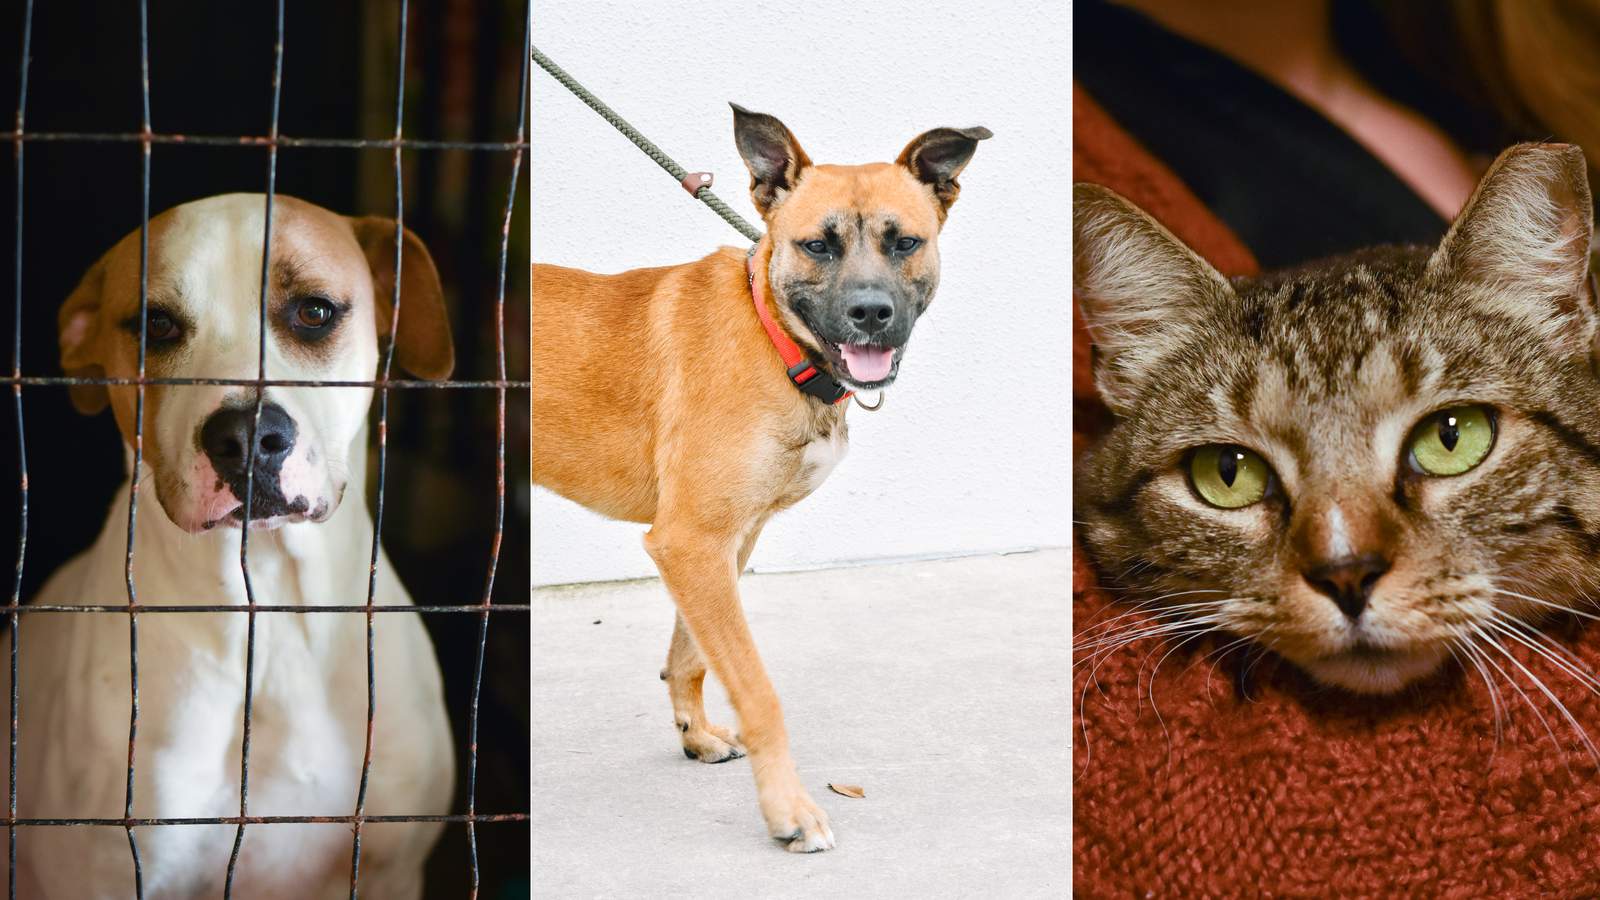 San Antonio Pets Alive lowers adoption fees to $10, asks for fosters